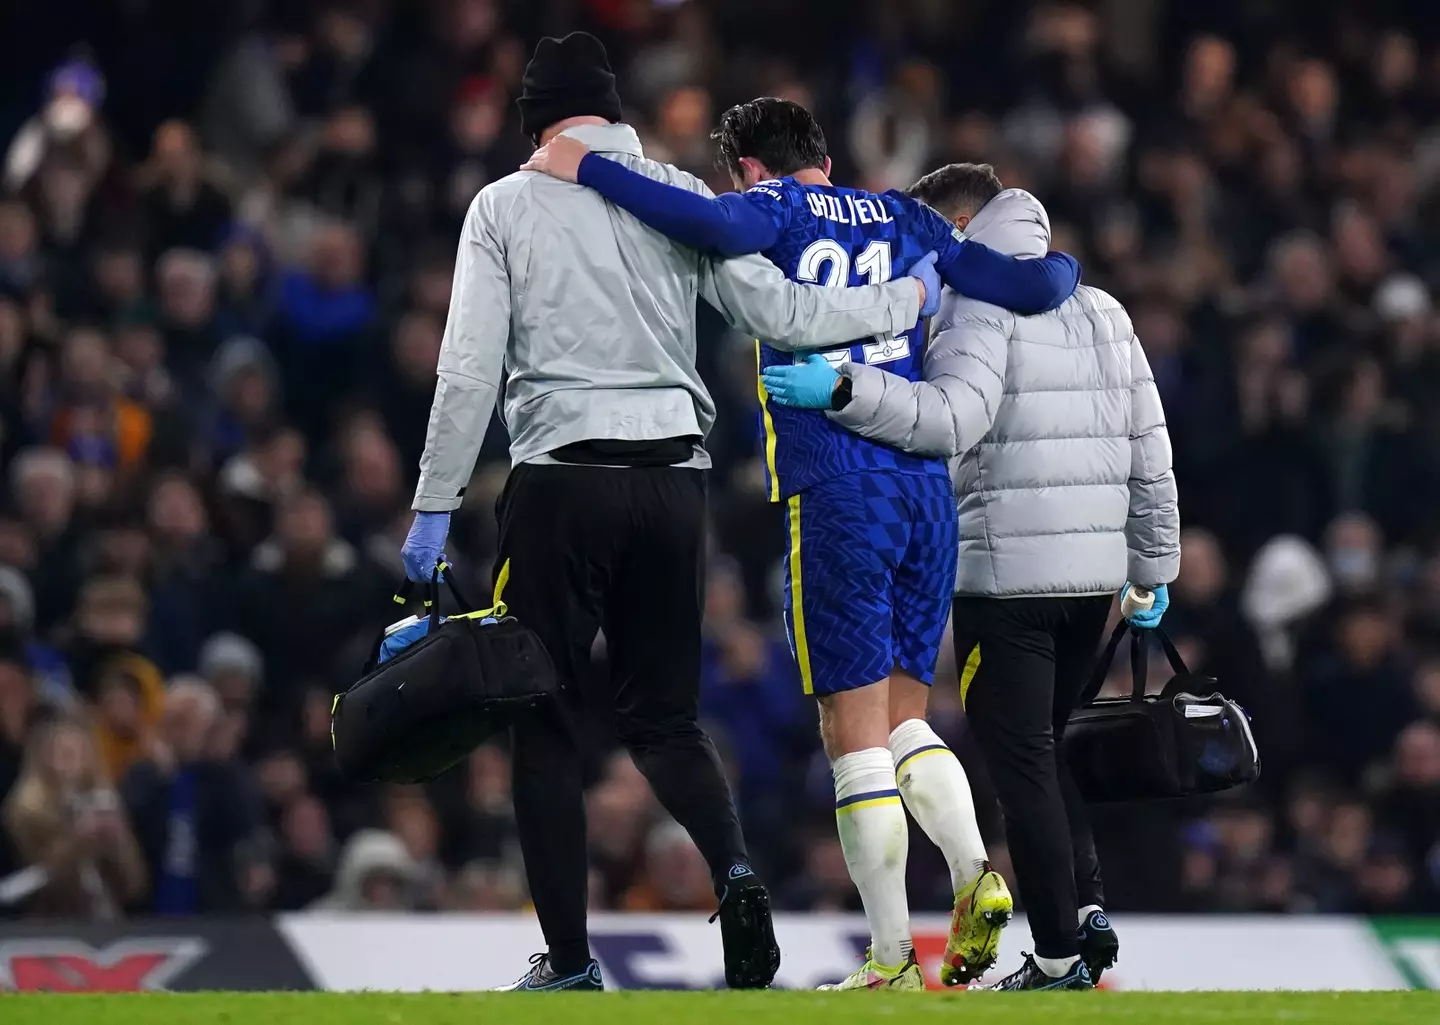 Chilwell gets taken off after his injury. Image: PA Images